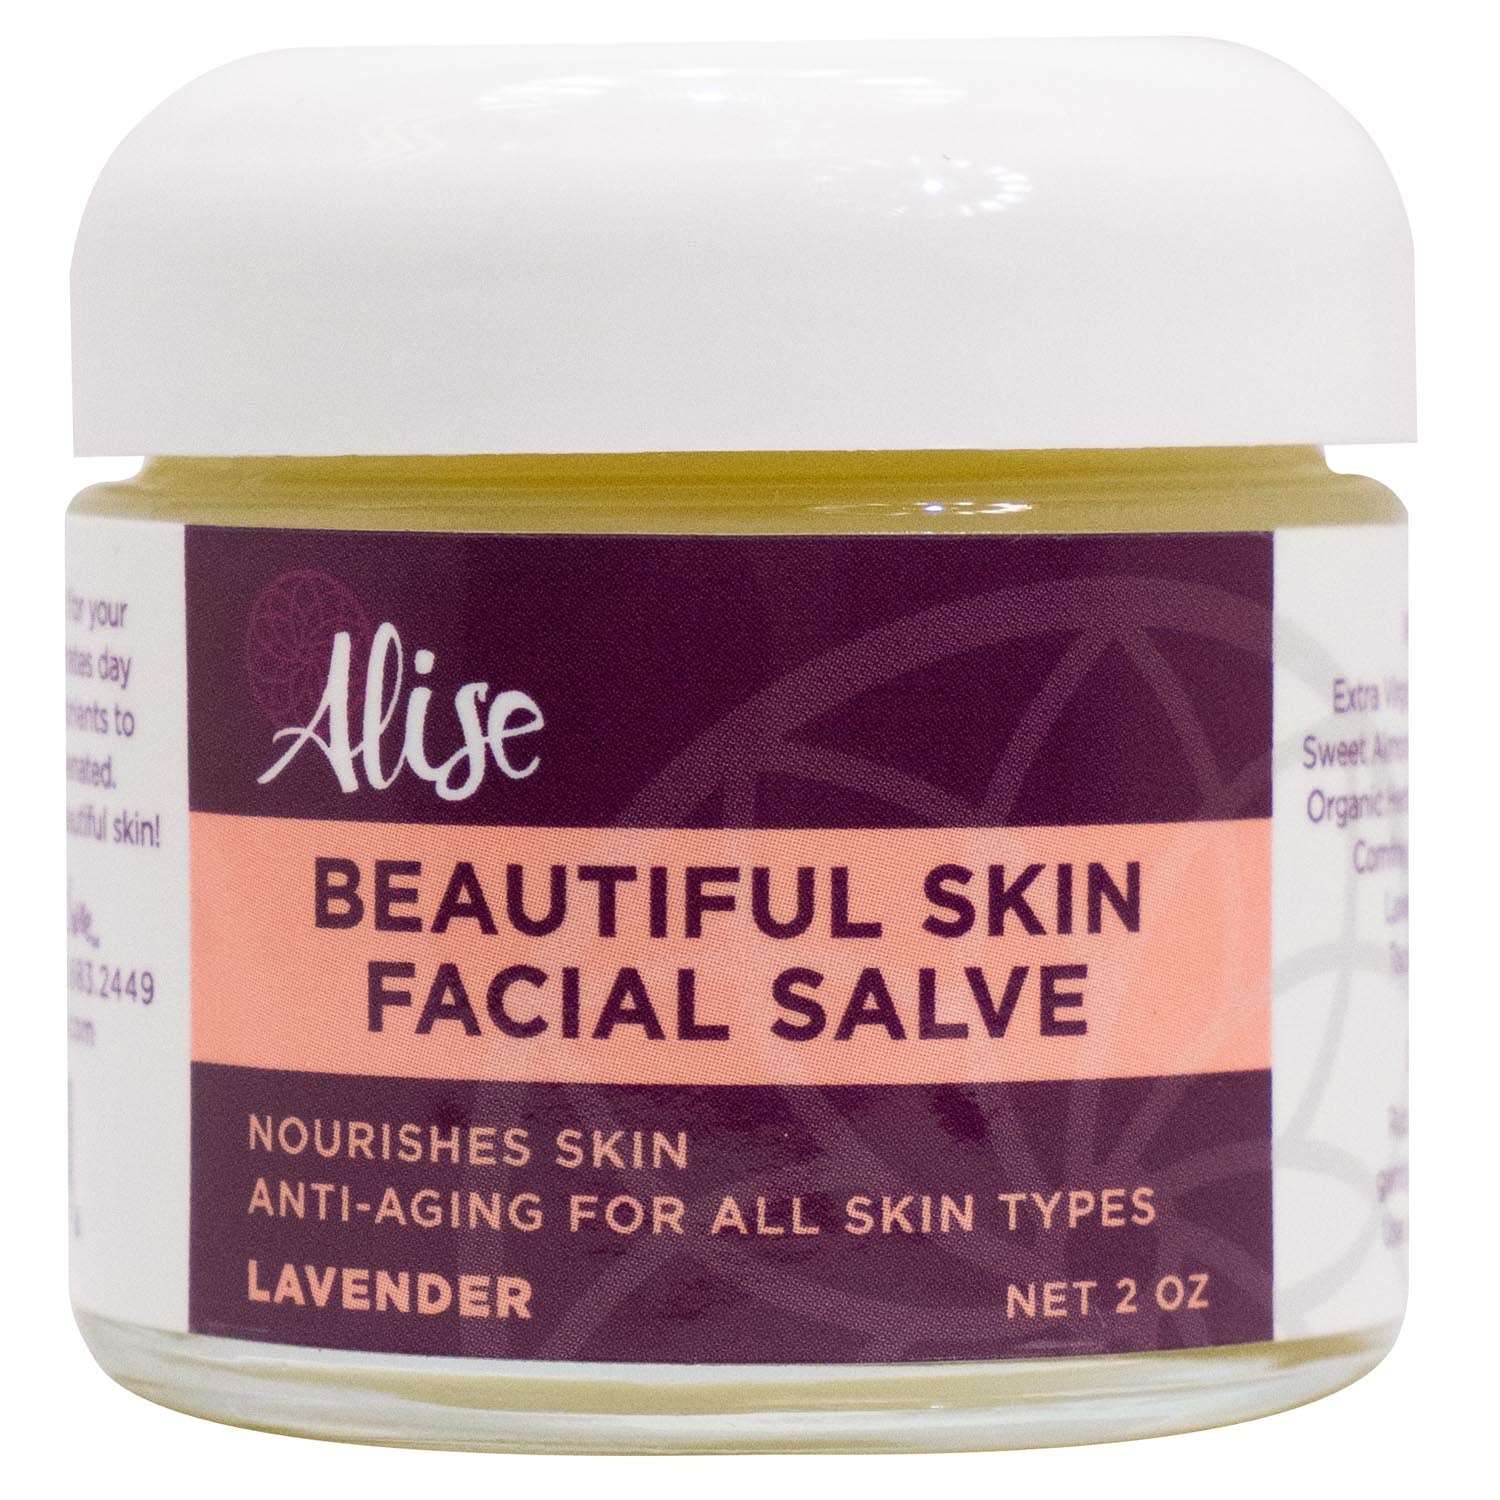 Beautiful Skin Facial Salve Lavender 2oz handcrafted by Alise Body Care